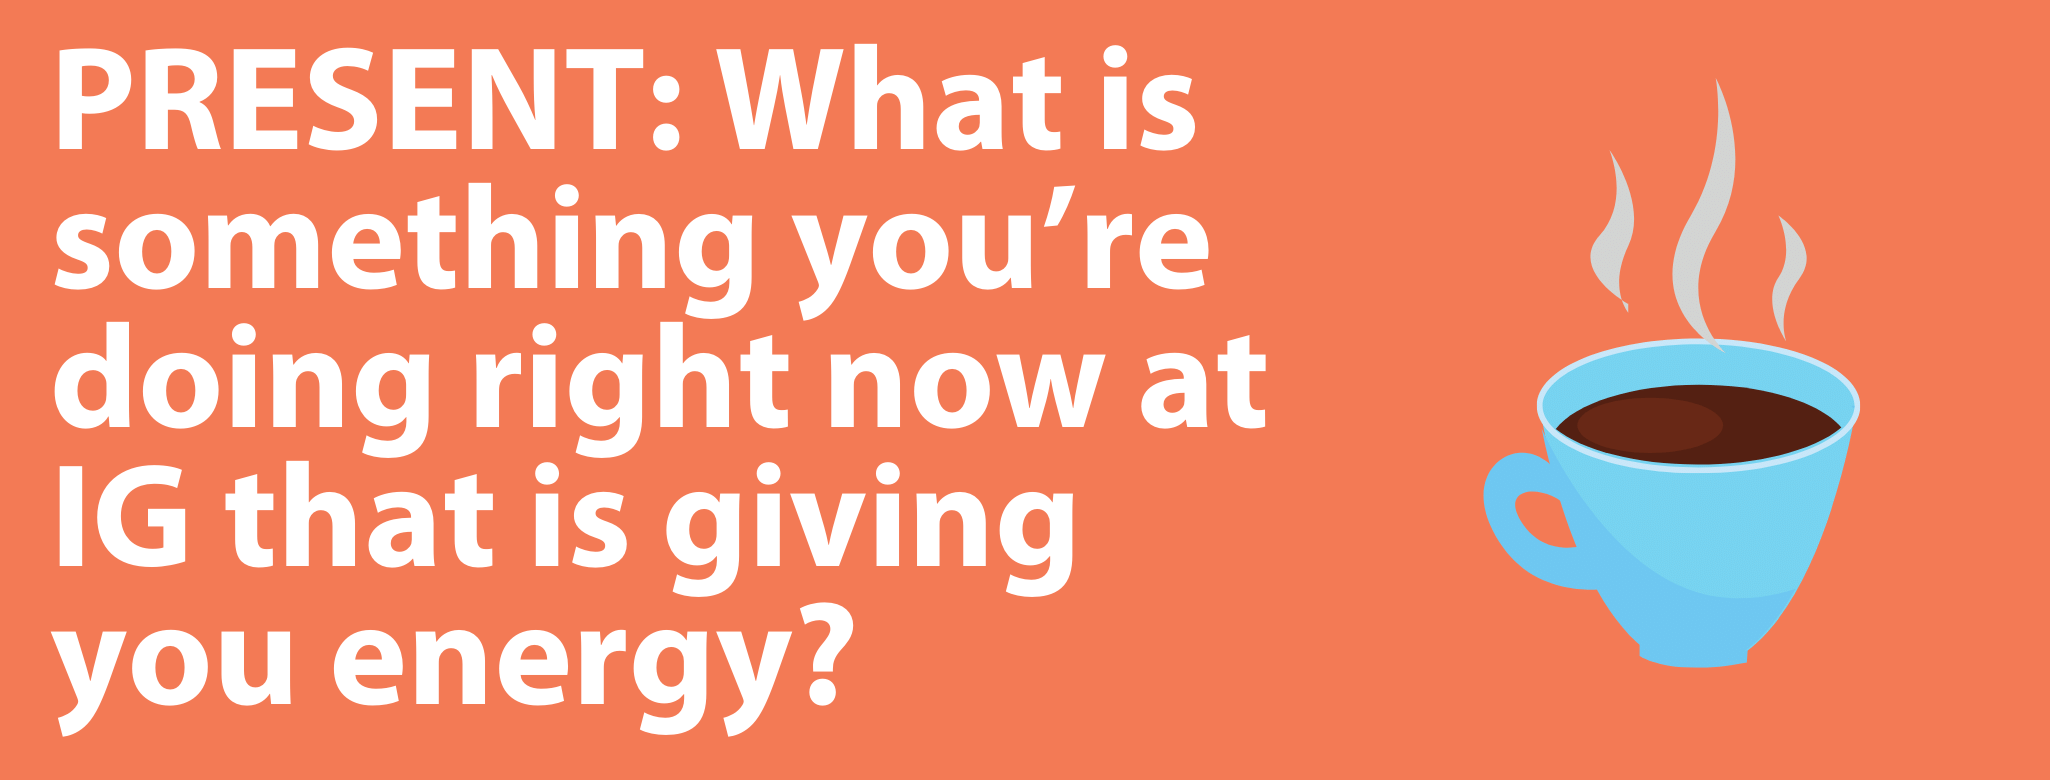 A graphic of white text on an orange background that says "PRESENT: What is something you’re doing right now at IG that is giving you energy?" and features an image of a cup of coffee